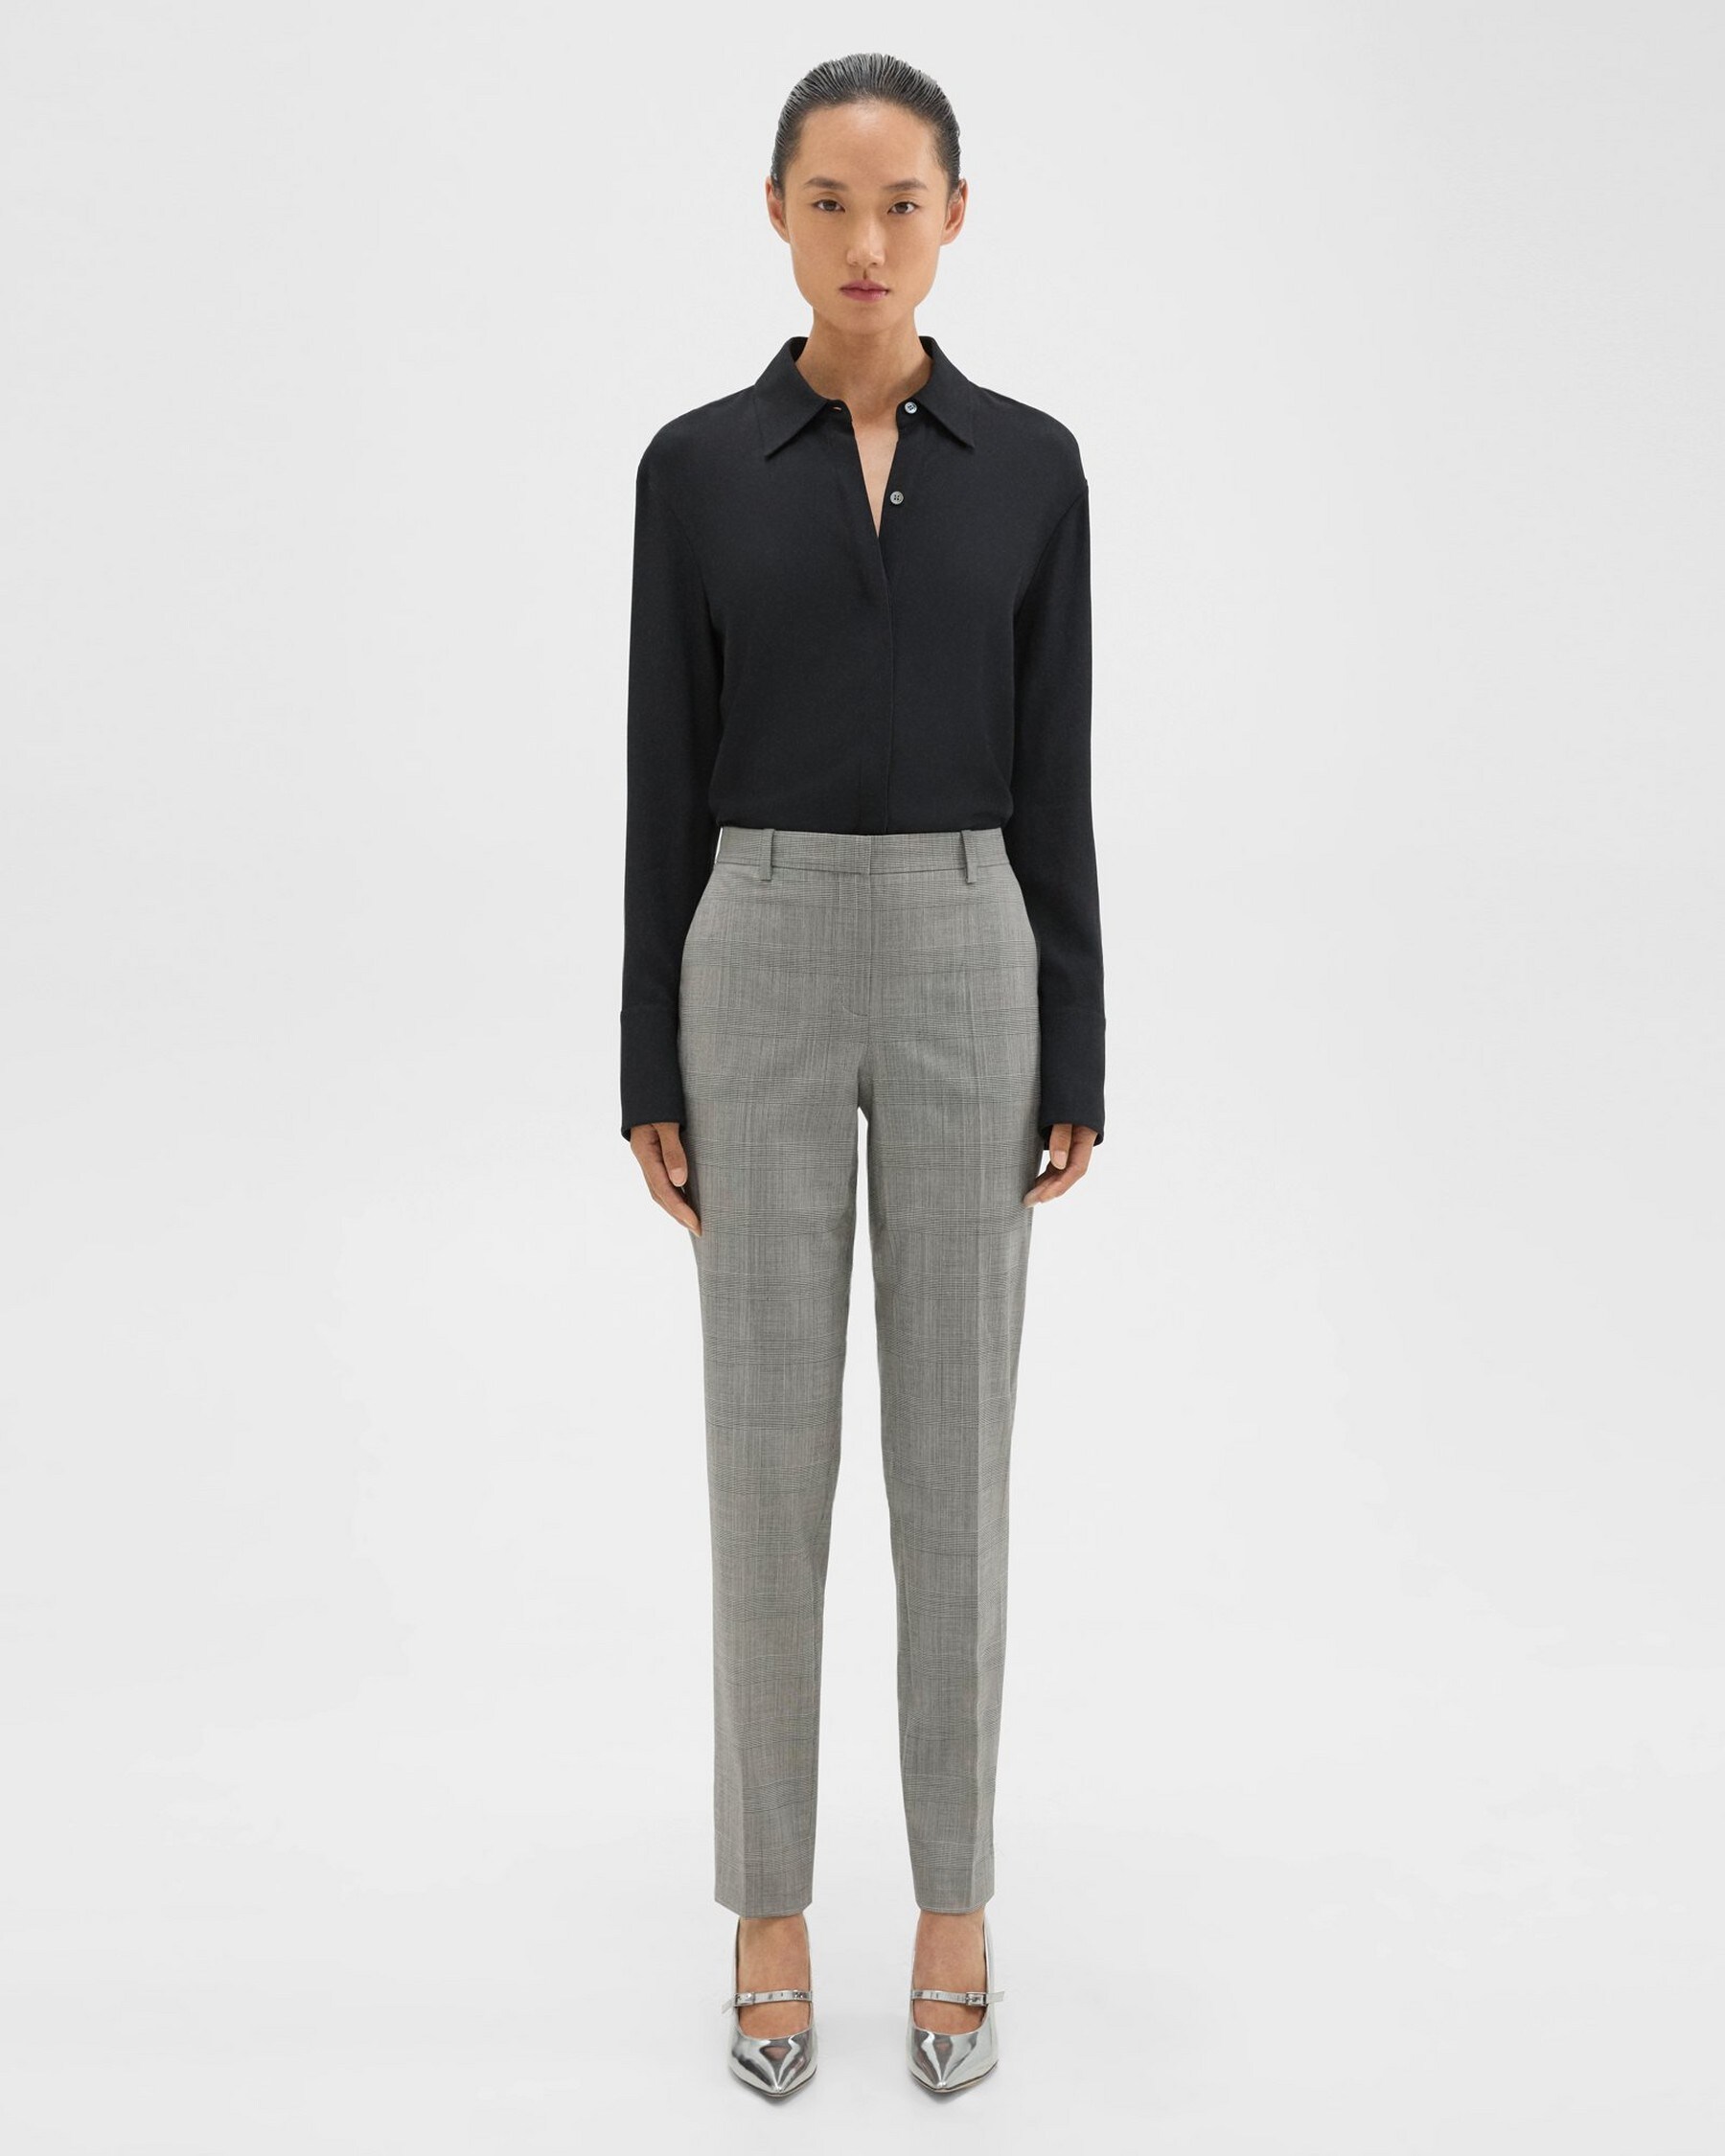 Theory Treeca Full-Length Pant in Plaid Stretch Wool